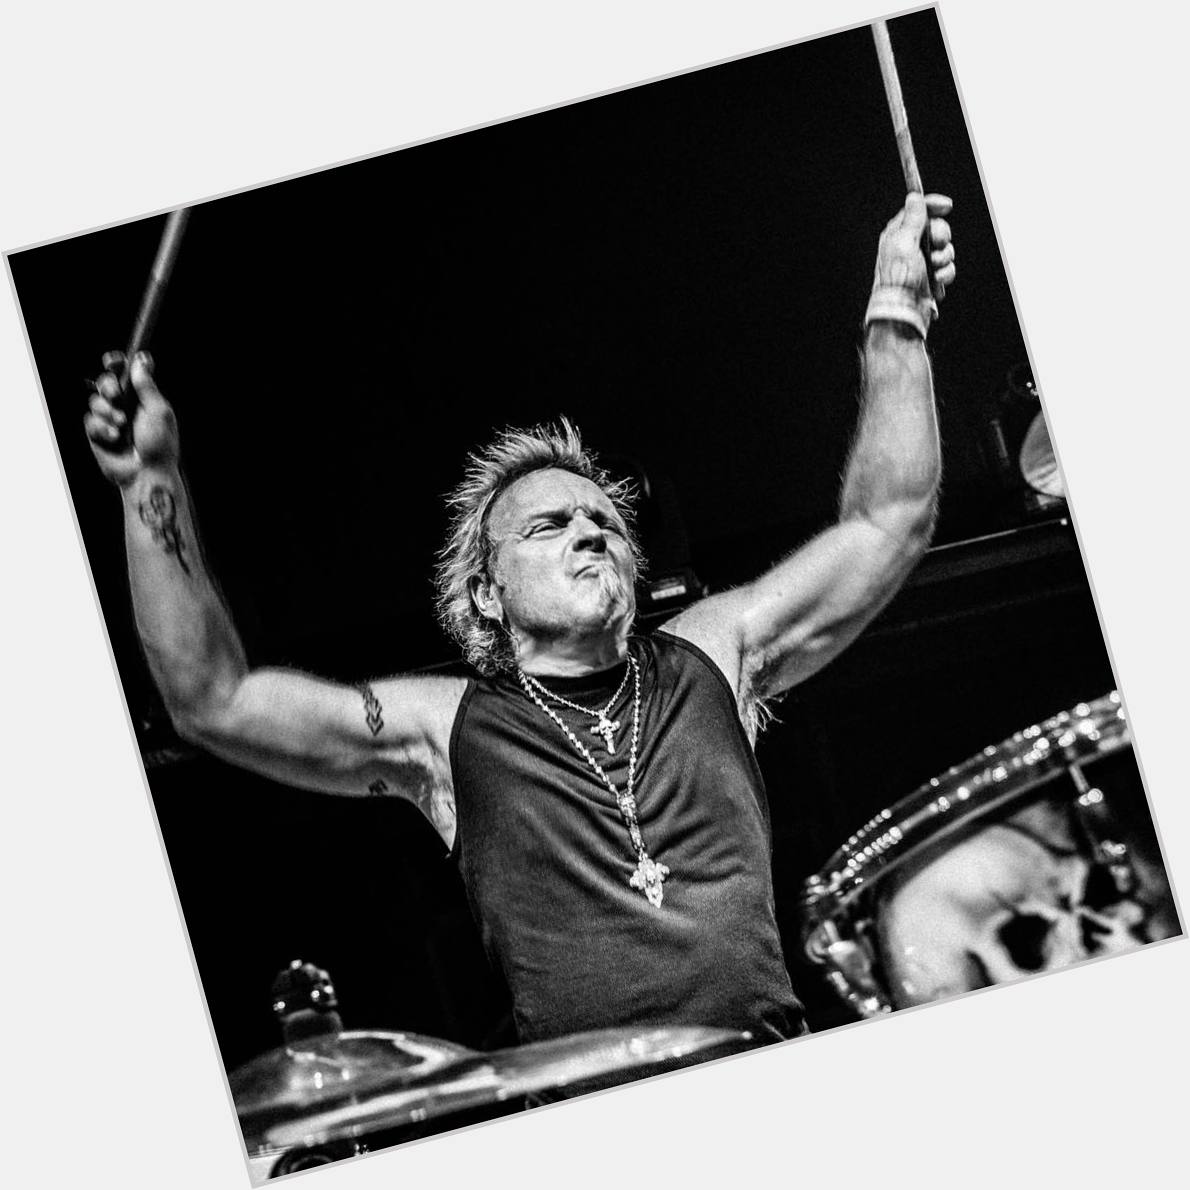 Happy Birthday Joey Kramer of 65 years rocking and no signs of stopping! 